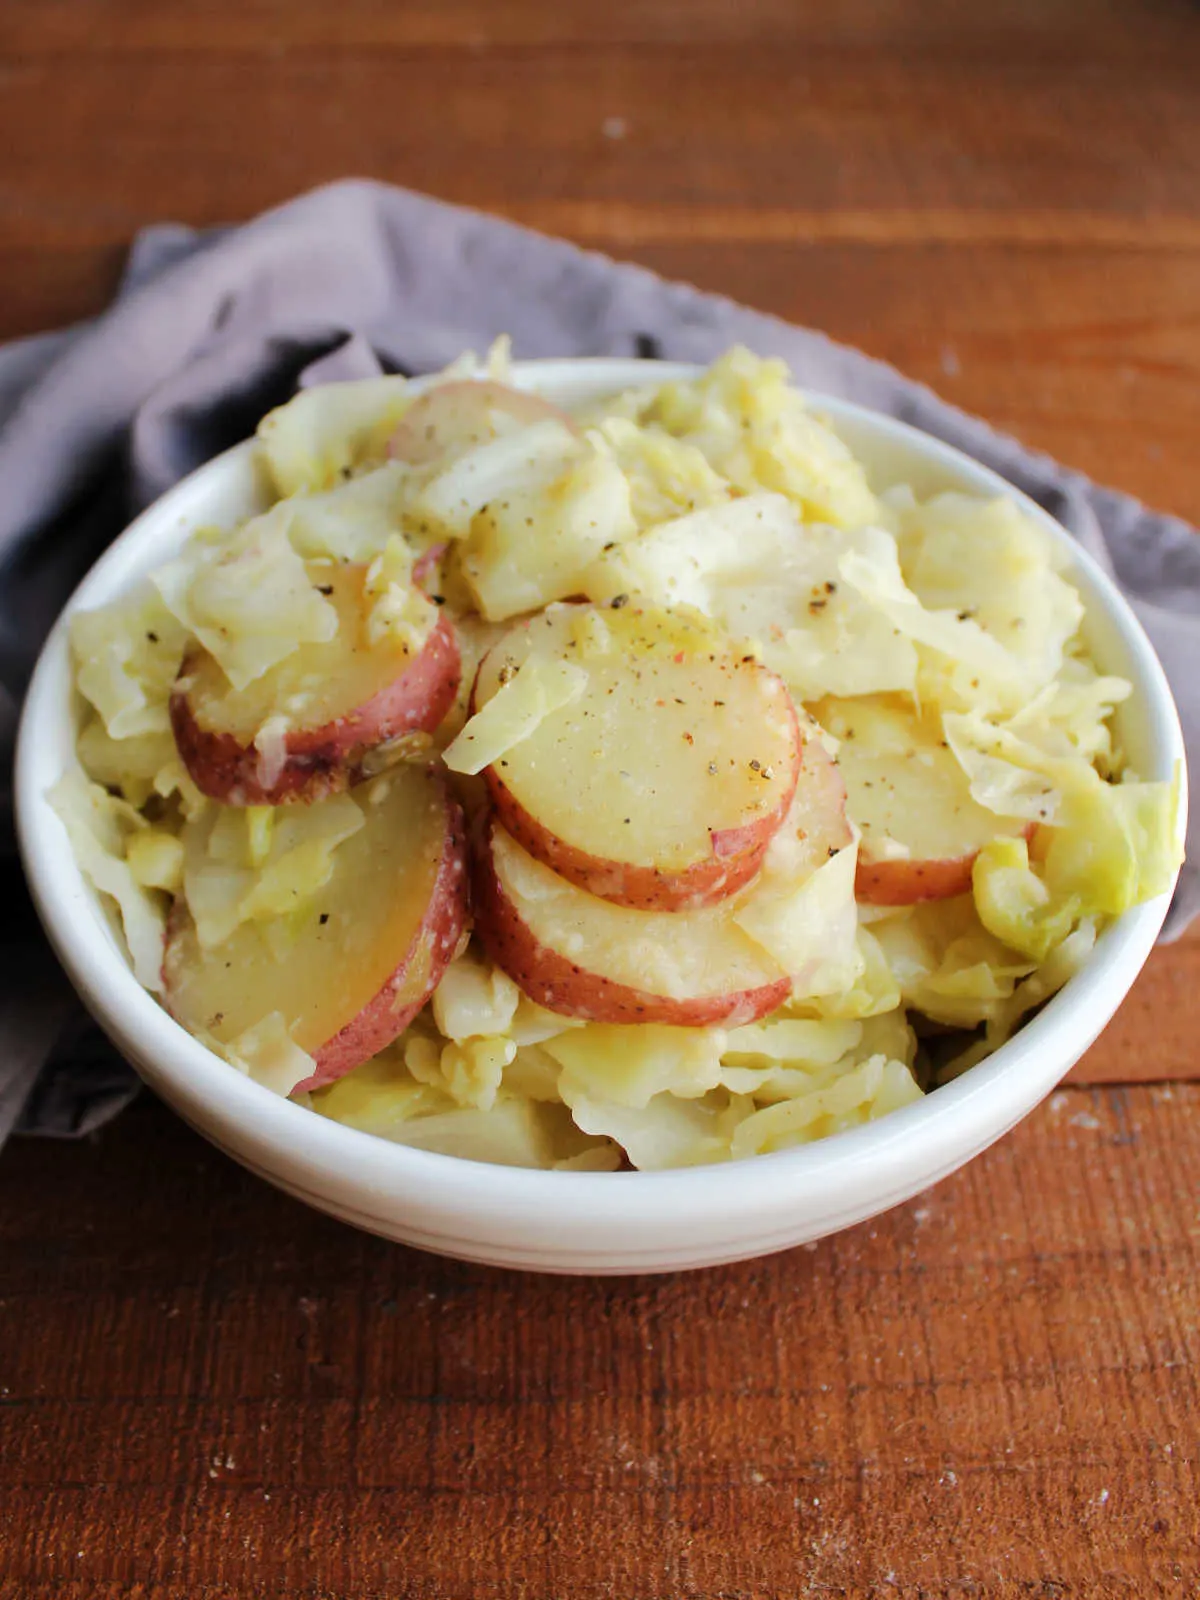 Serving bowl filled with cooked cabbage and potatoes topped with Parmesan cheese and ground black pepper.